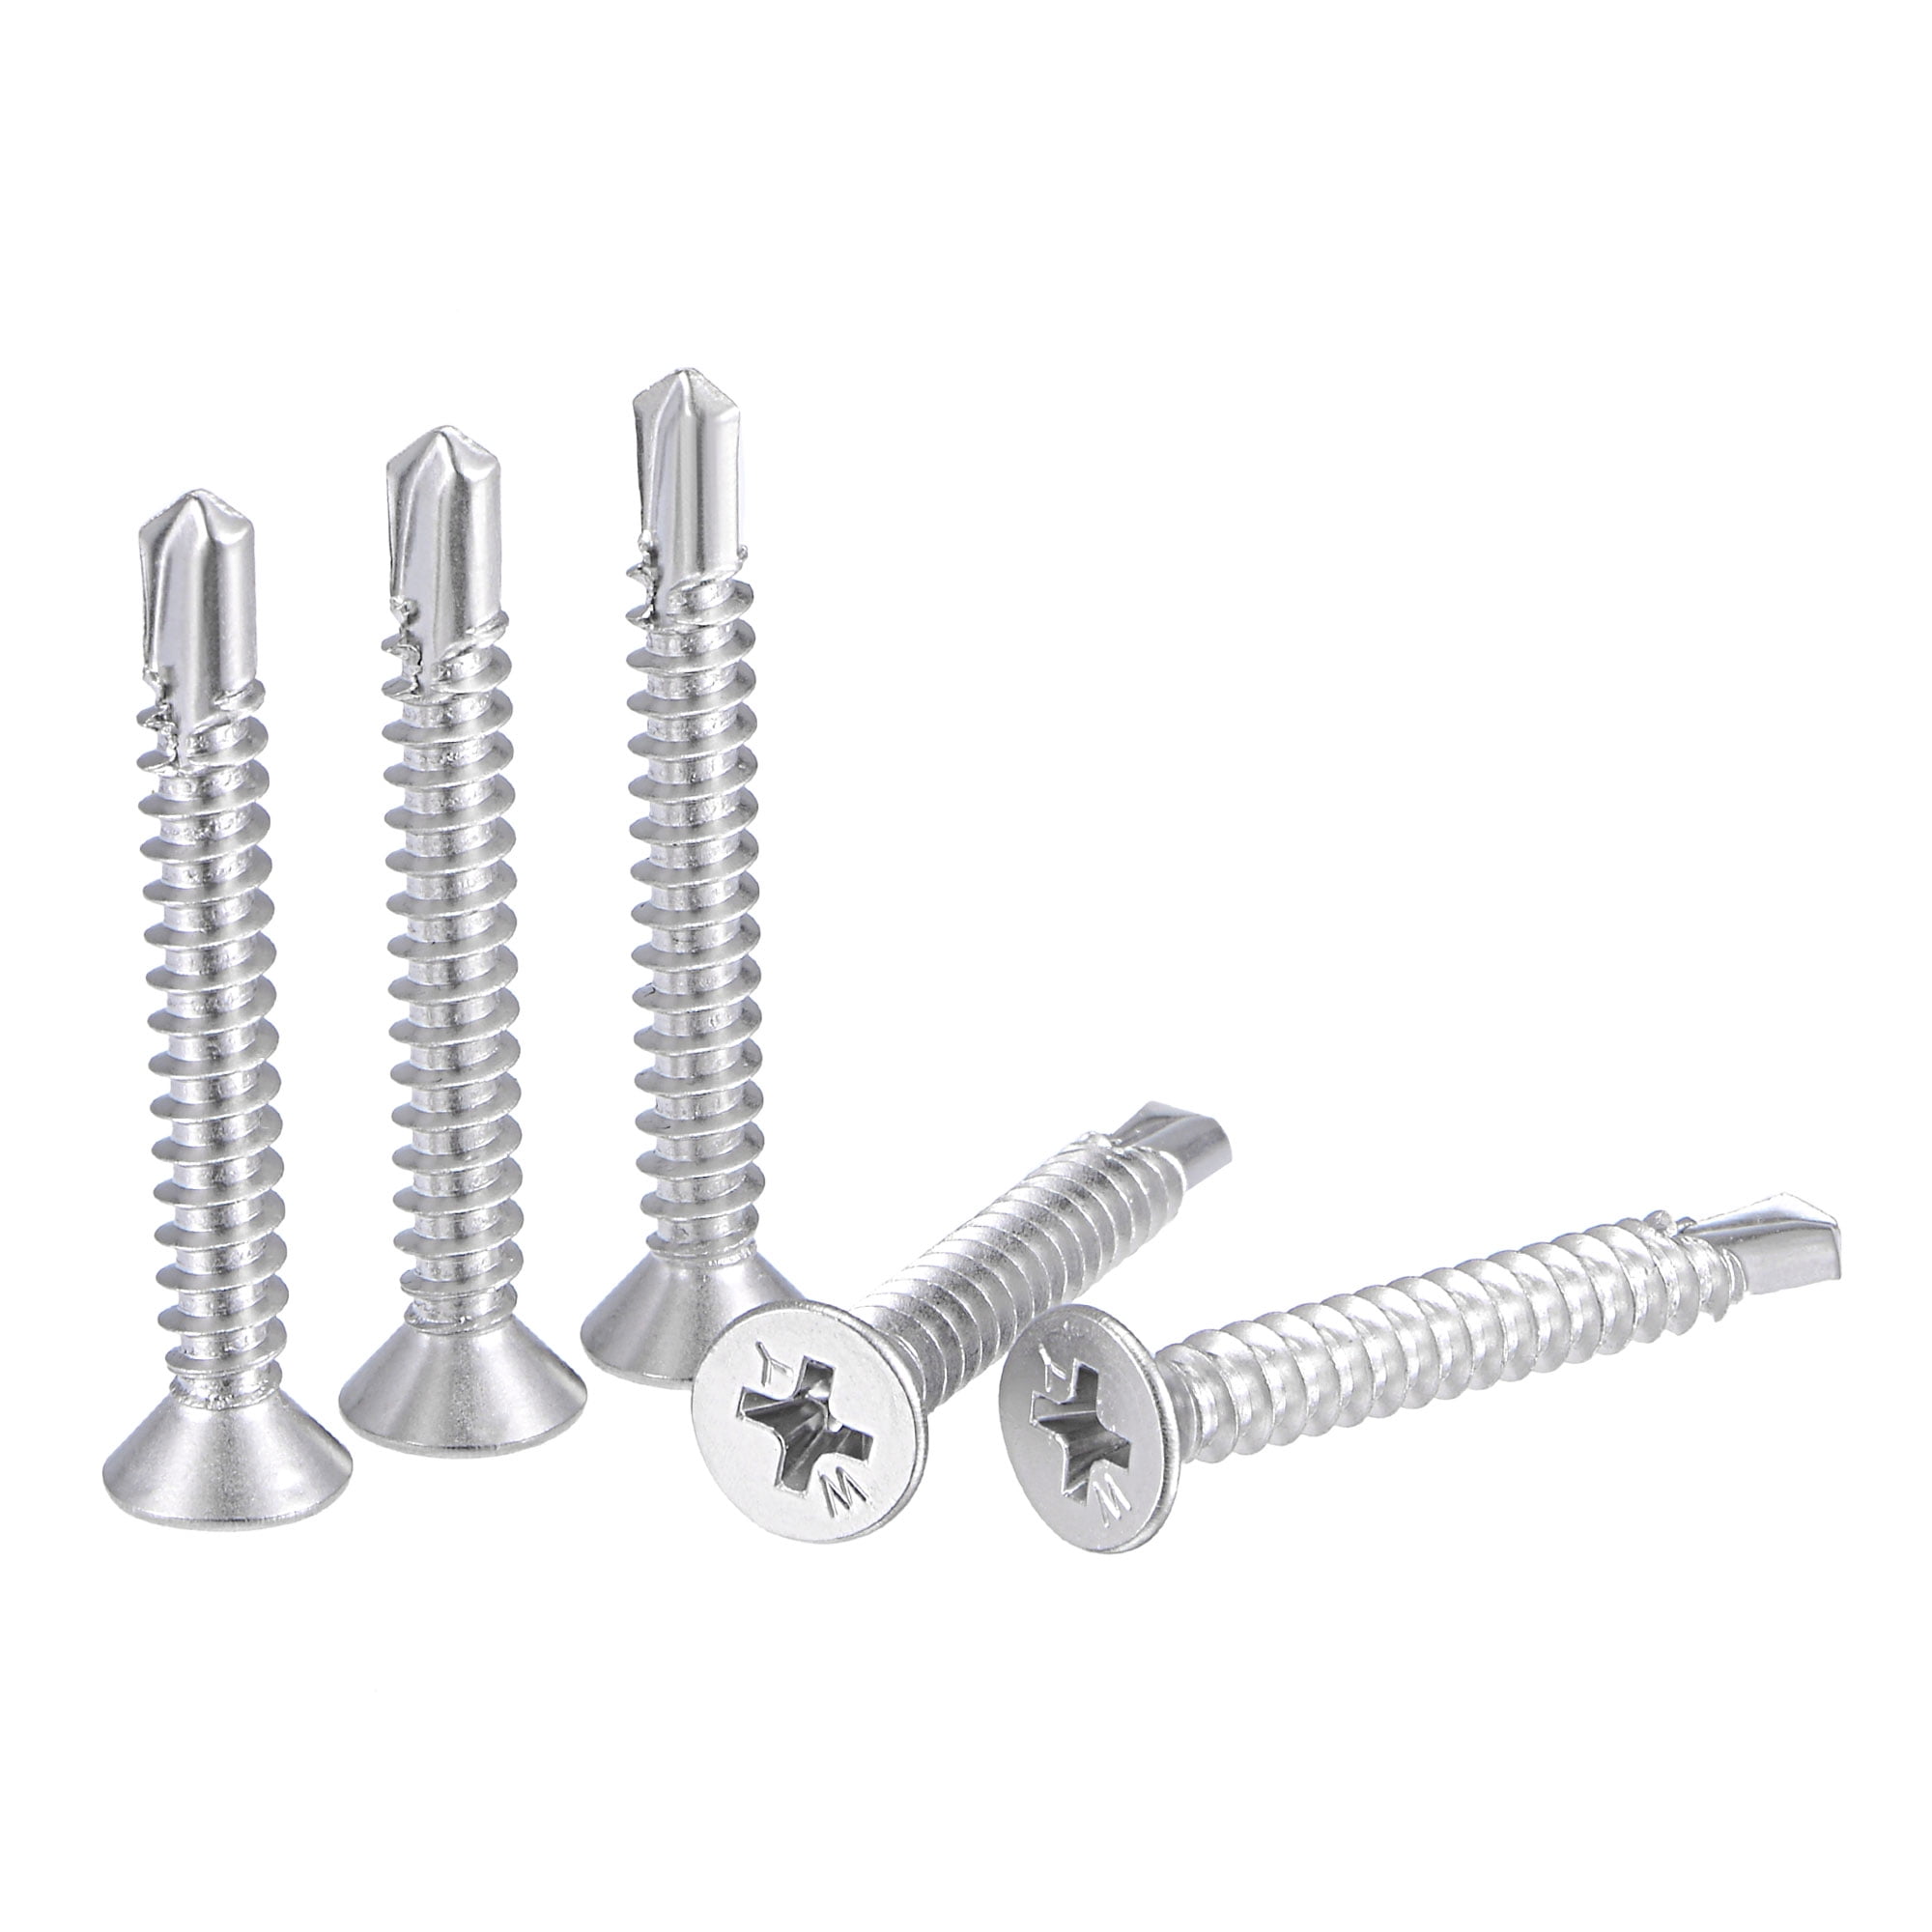 No.4 x 9mm 3/8'' Stainless Steel Countersunk Self Tapping Screws 20 Pk. 